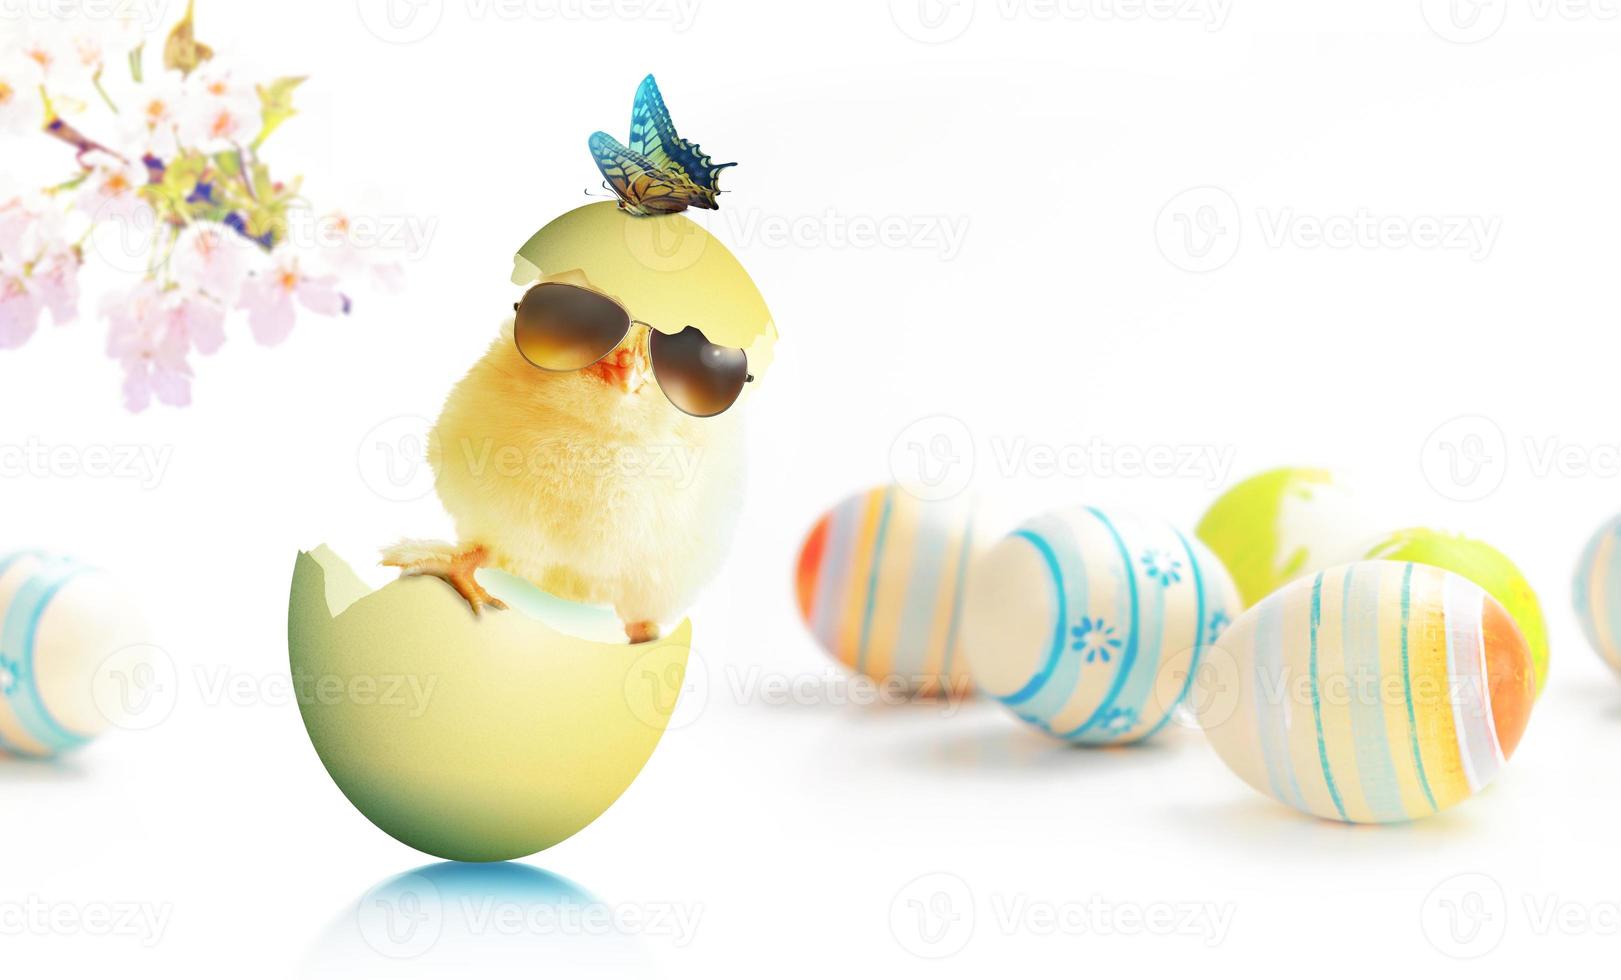 Funny cute baby chick with sunglasses and egg. photo